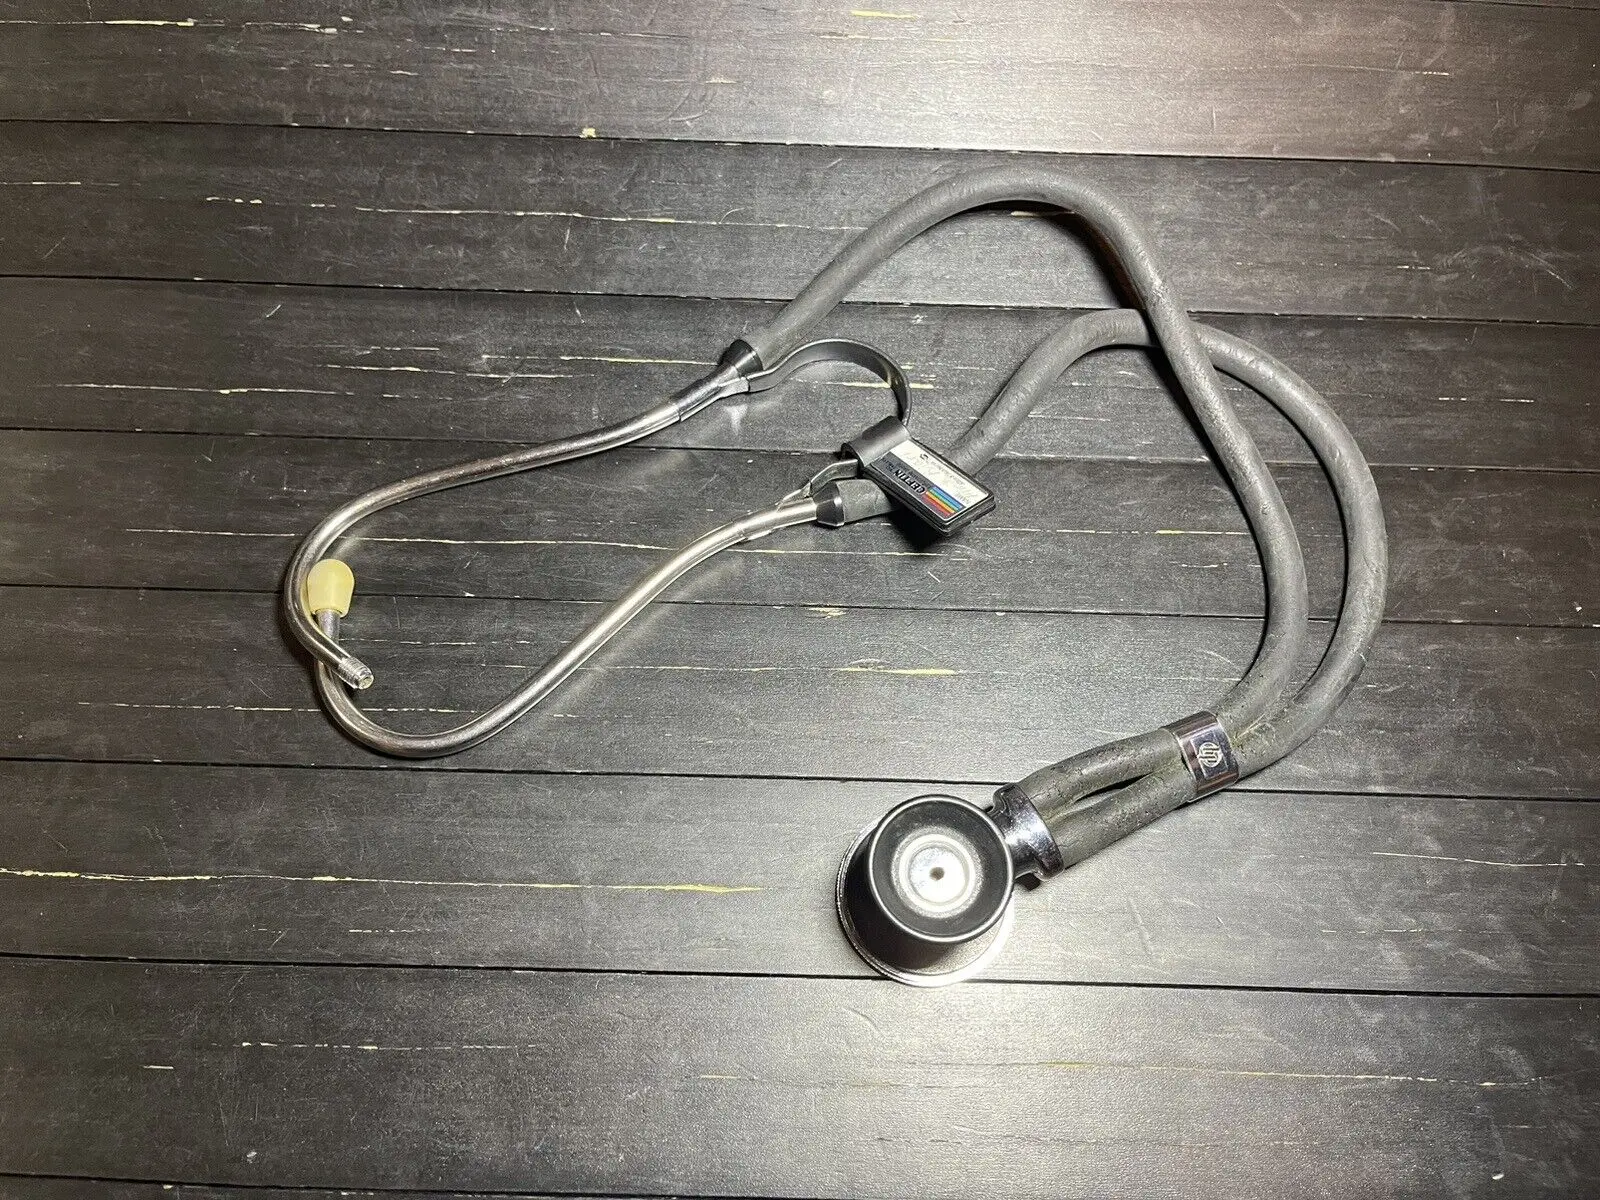 hewlett packard stethoscope - What is the history of Sprague Rappaport stethoscope